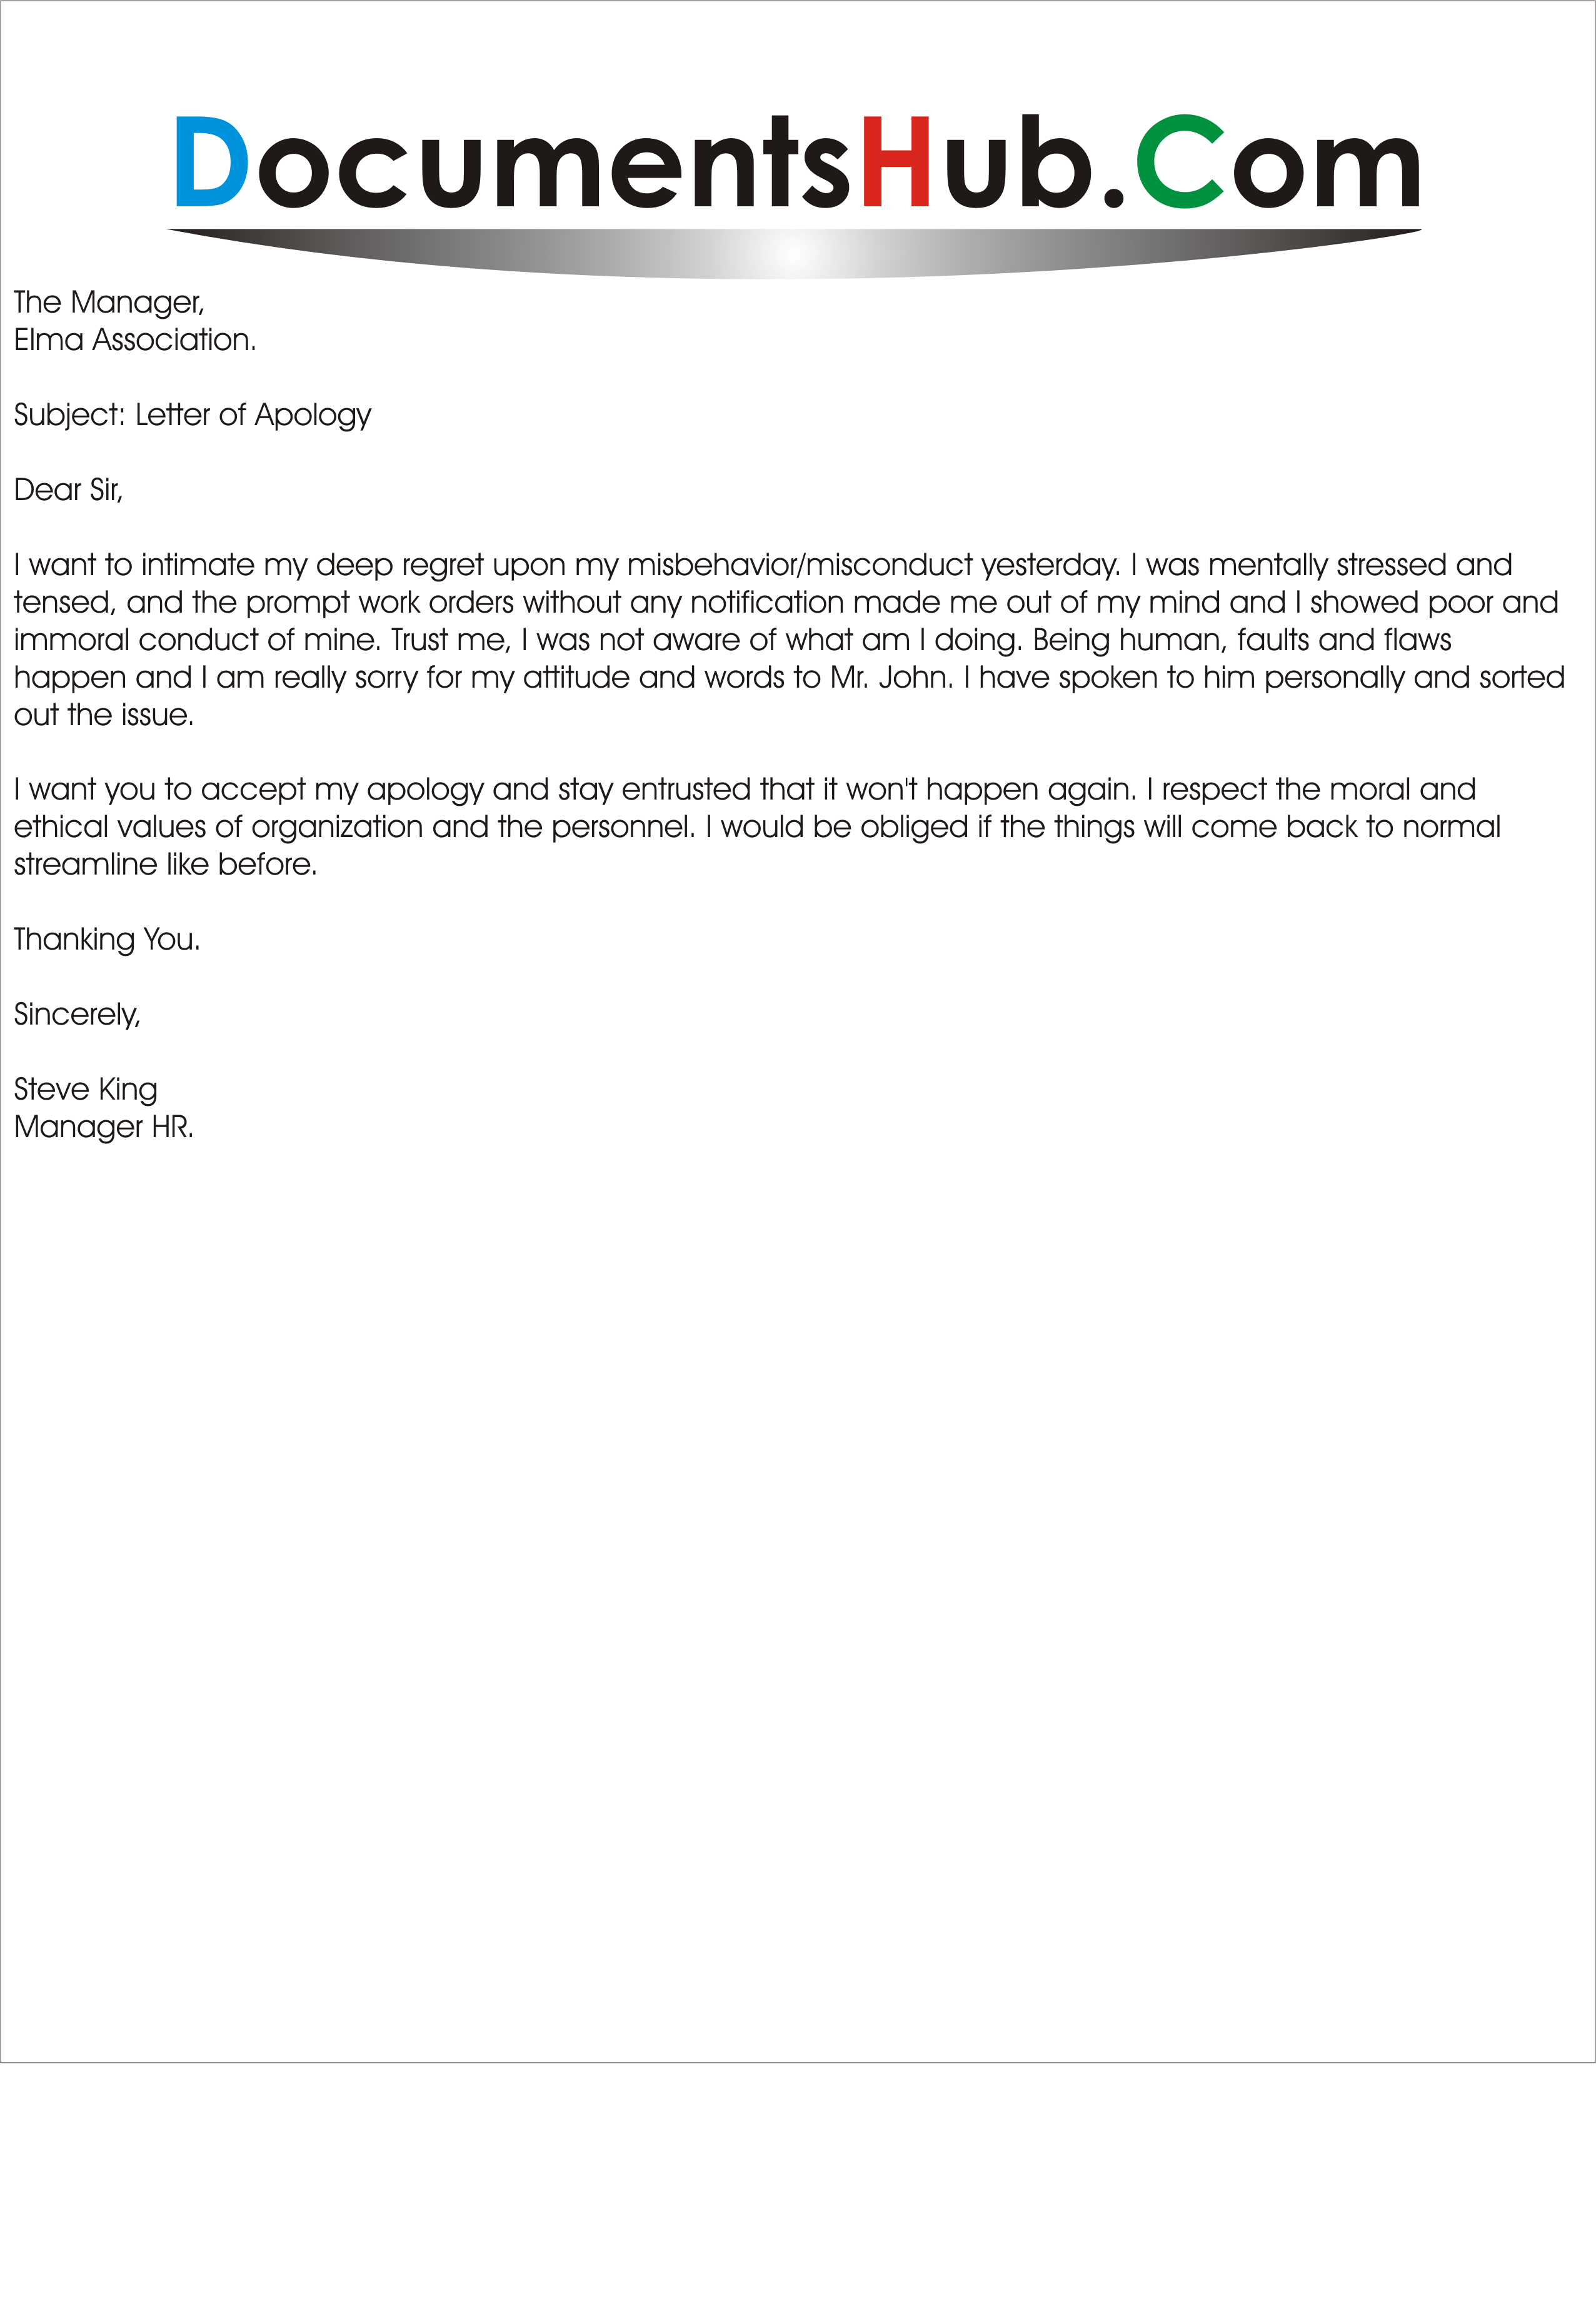 Apology Letter Sample Boss Apology Letter to Employer